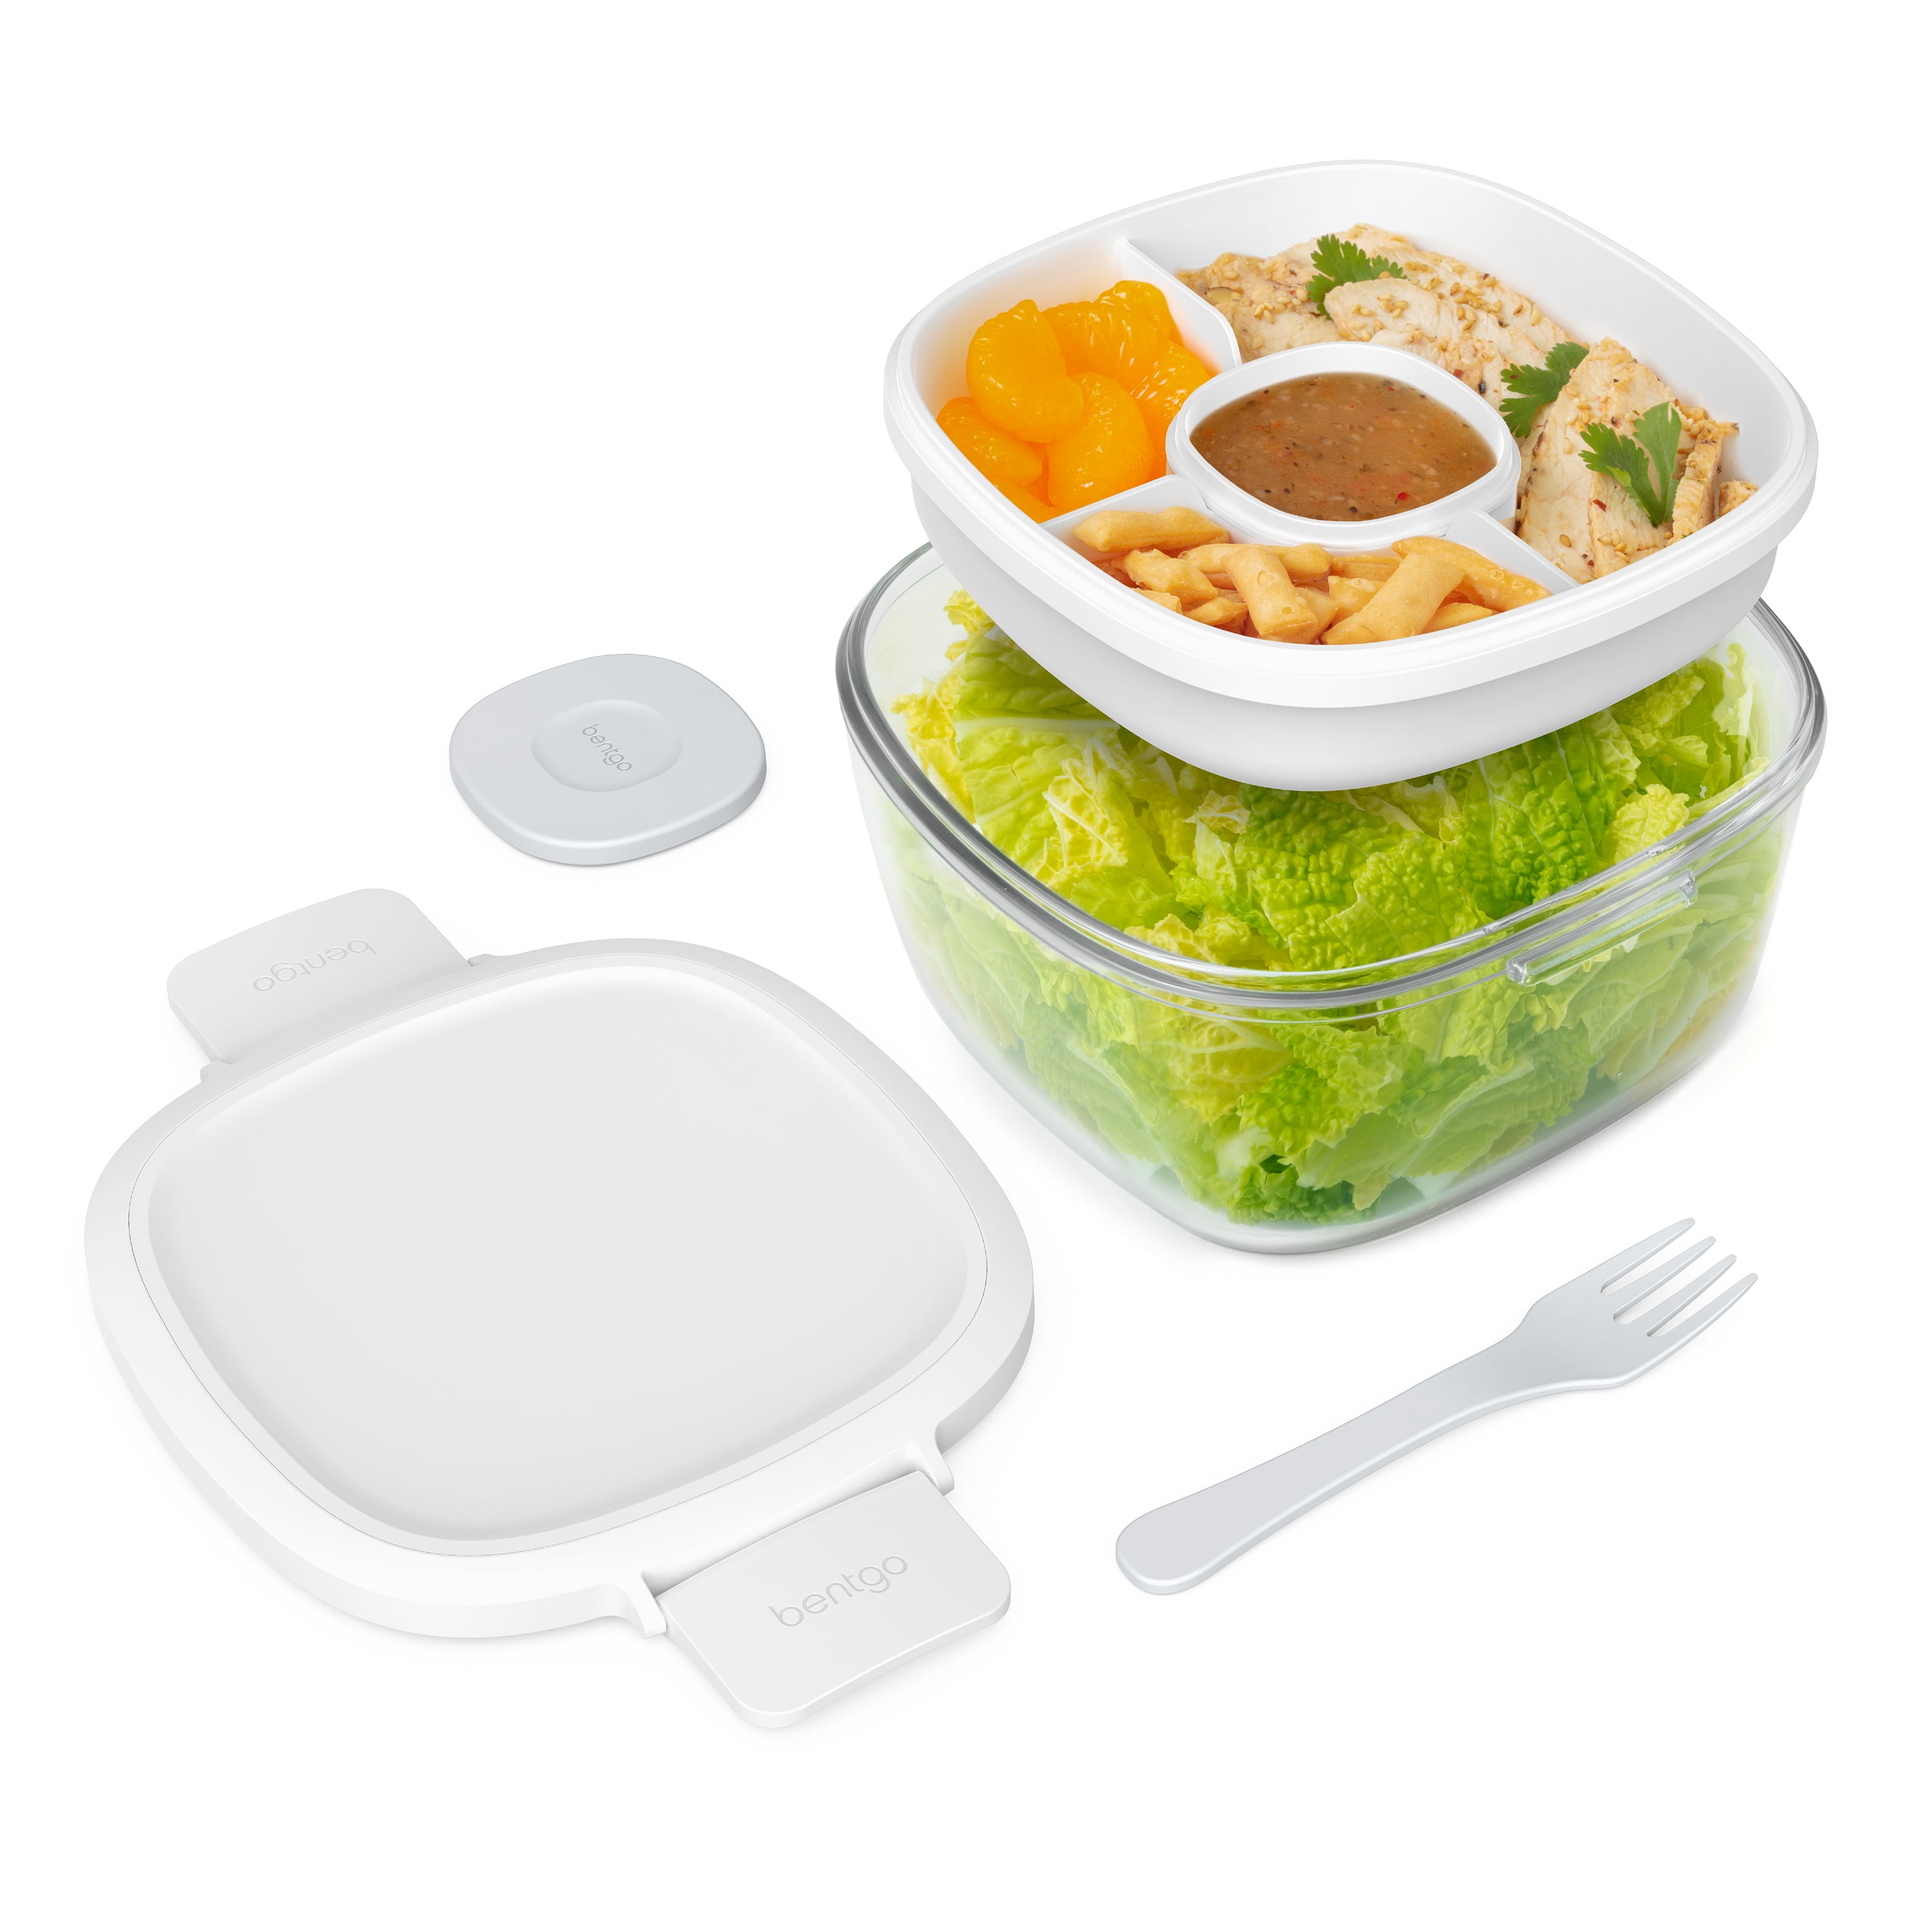 Bentgo® Glass Snack - Leak-Proof Bento-Style Snack Container with Airtight  Lid and Divided 2-Compartment Design - 1.75 Cup Capacity for Meal Prepping